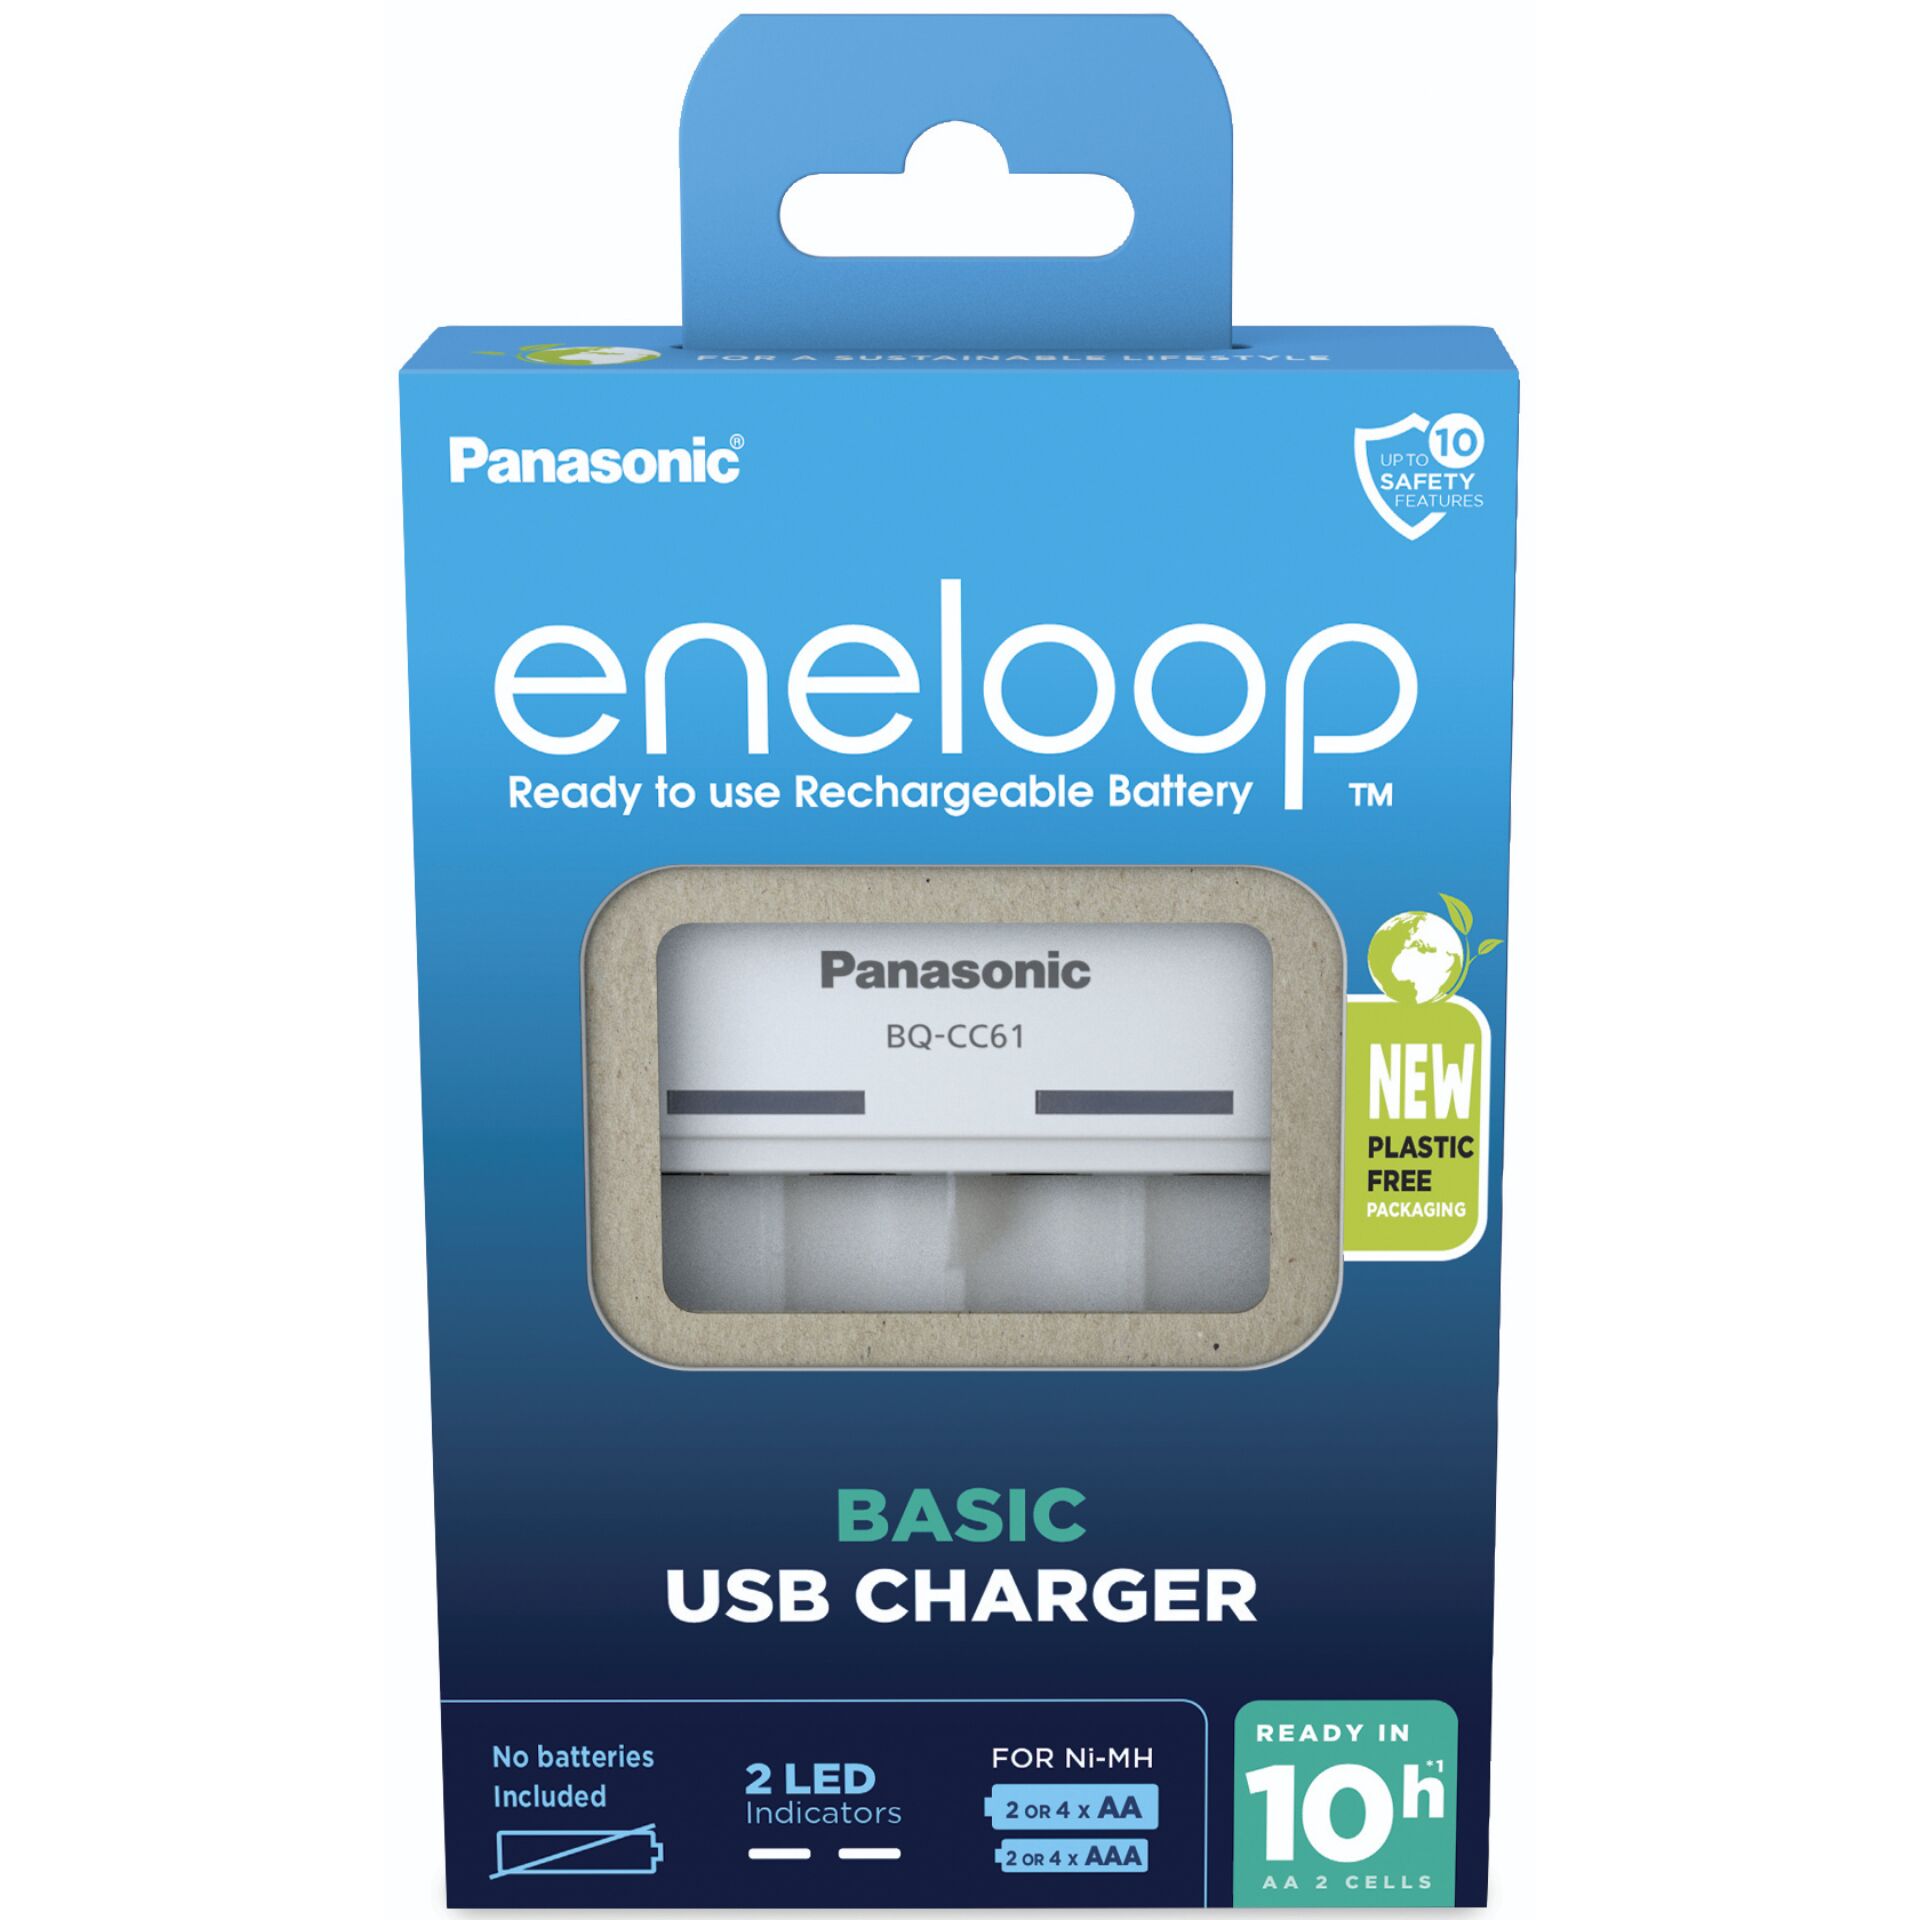 Panasonic Eneloop Basic Charger USB BQ-CC61 (Batteries Not Included)